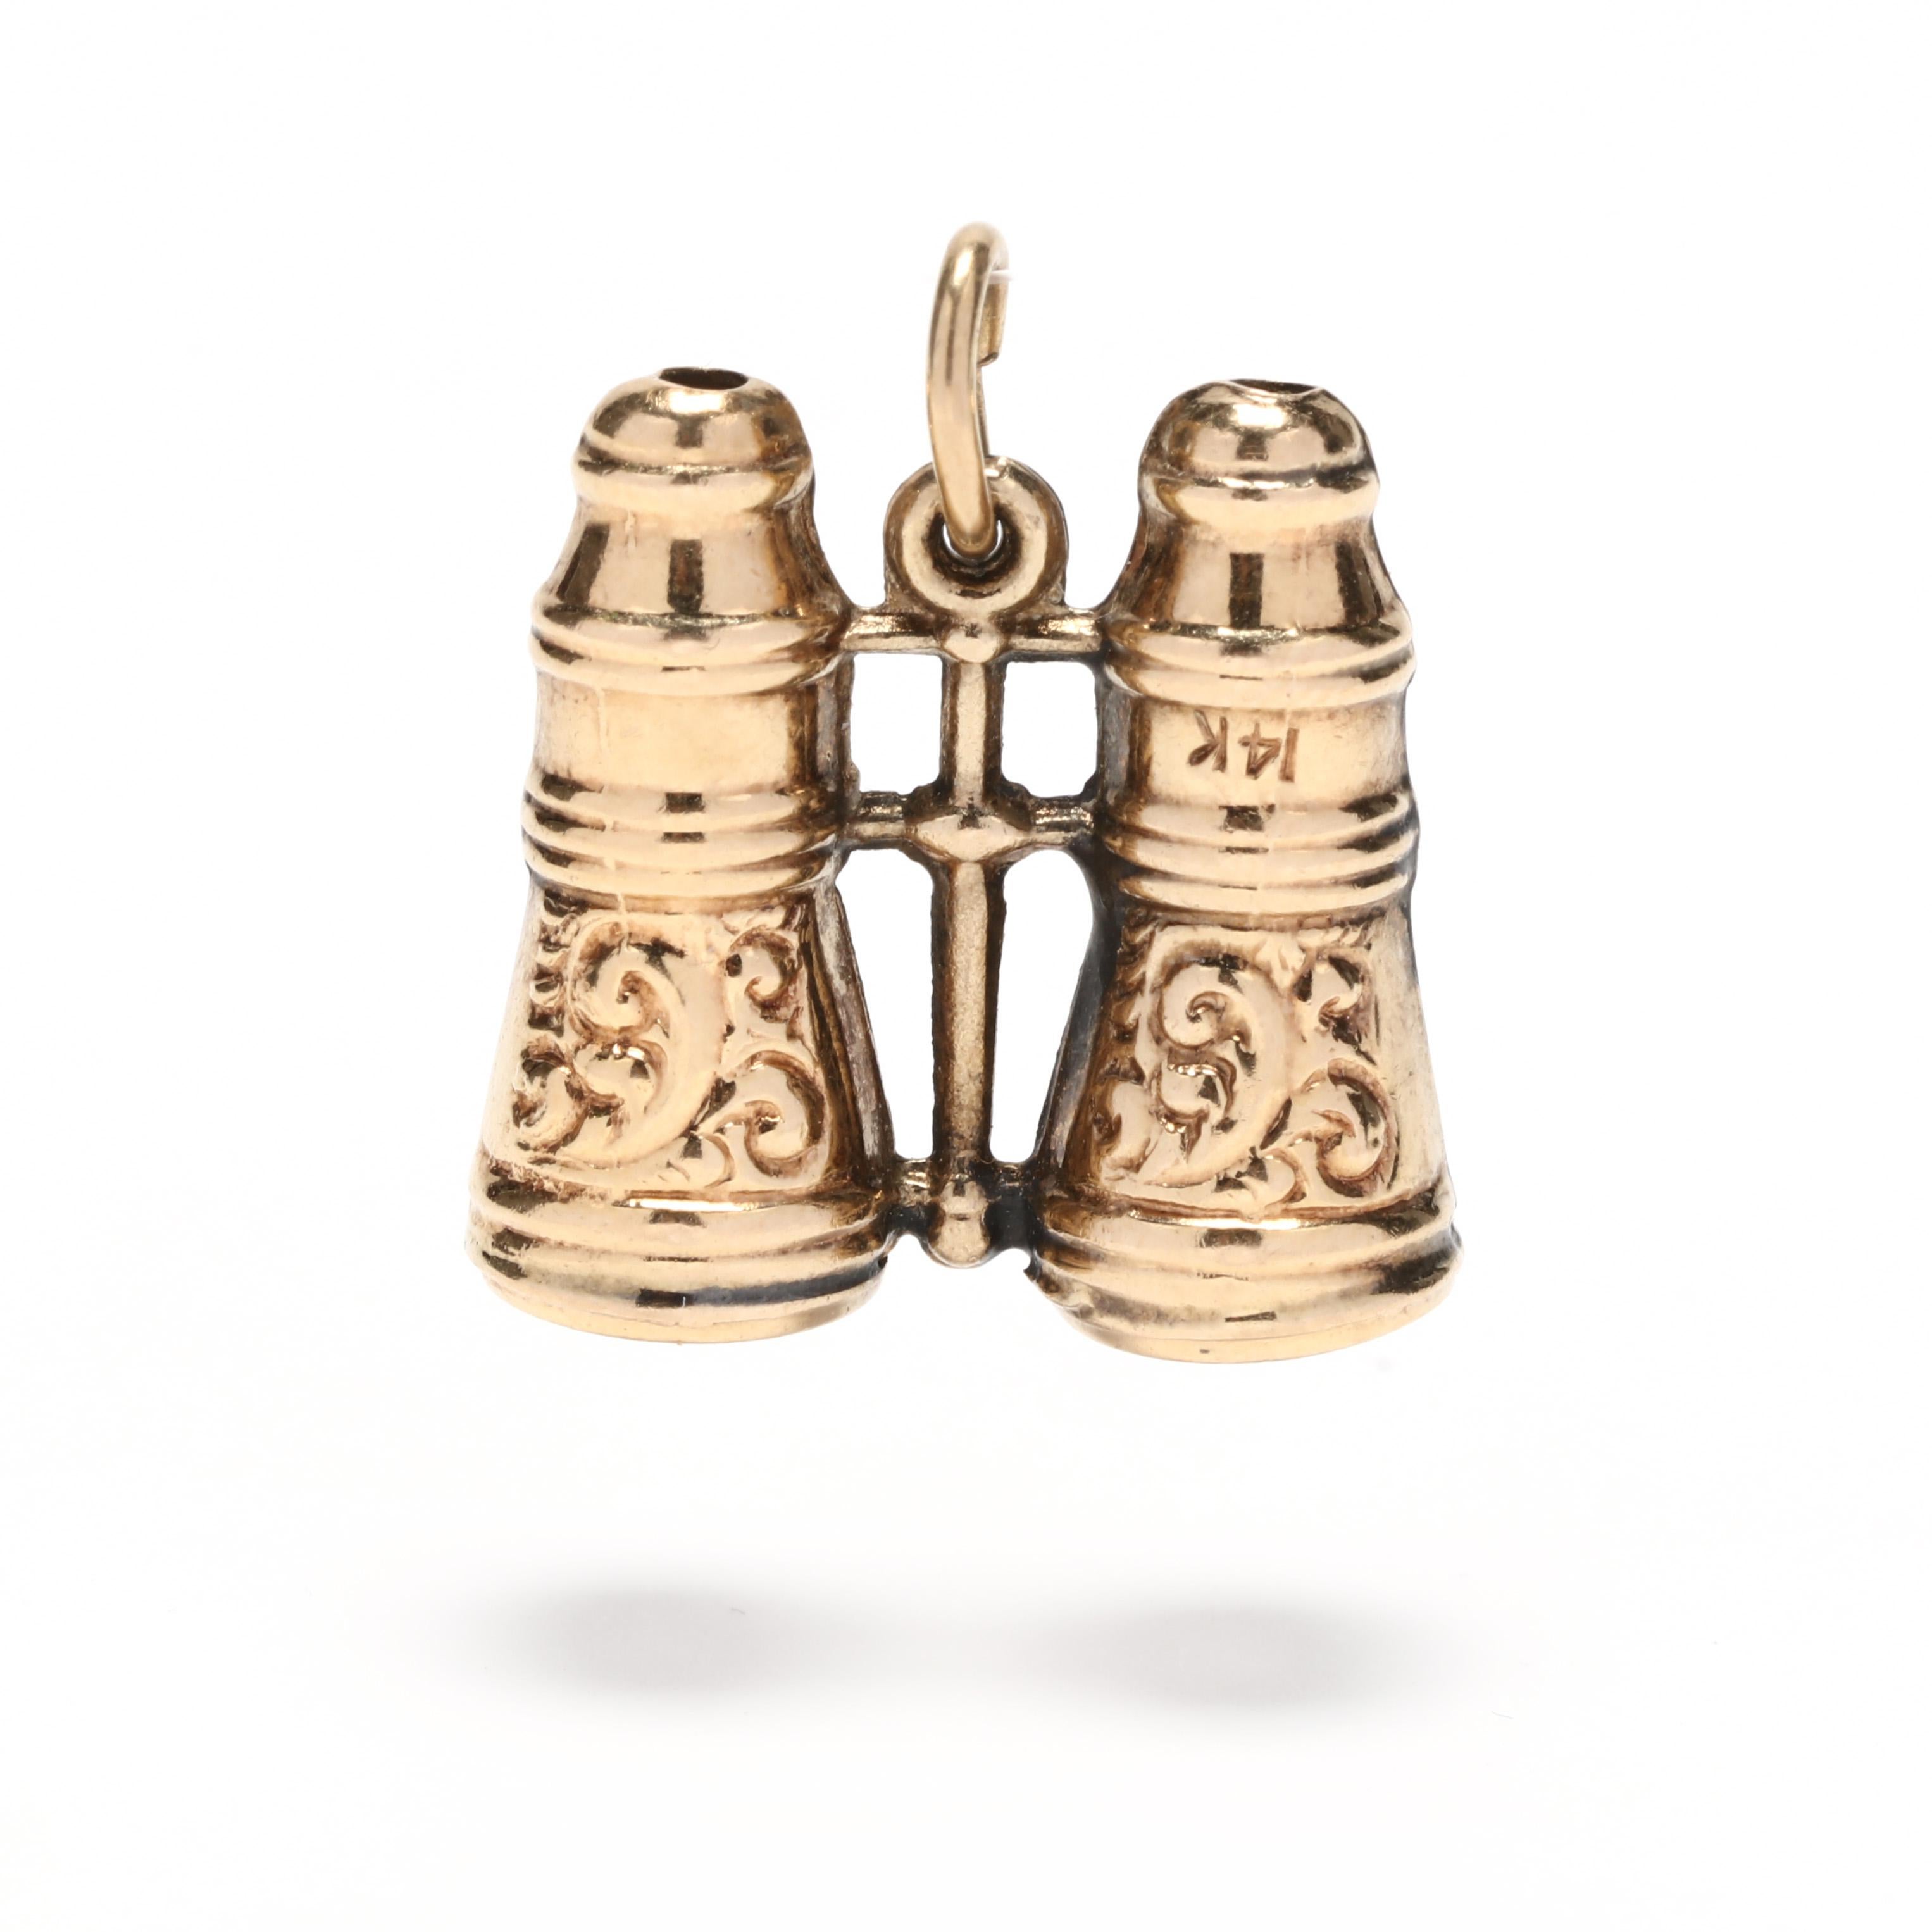 A antique 14 karat yellow gold engraved binoculars charm / pendant.  Of Victorian era, a pair of ornately engraved binoculars with a swirl motif and suspended from a thin oval bail.

Length: 3/4 in.

Width: 3/4 in.

2.9 dwts.

A Couple Of Things to